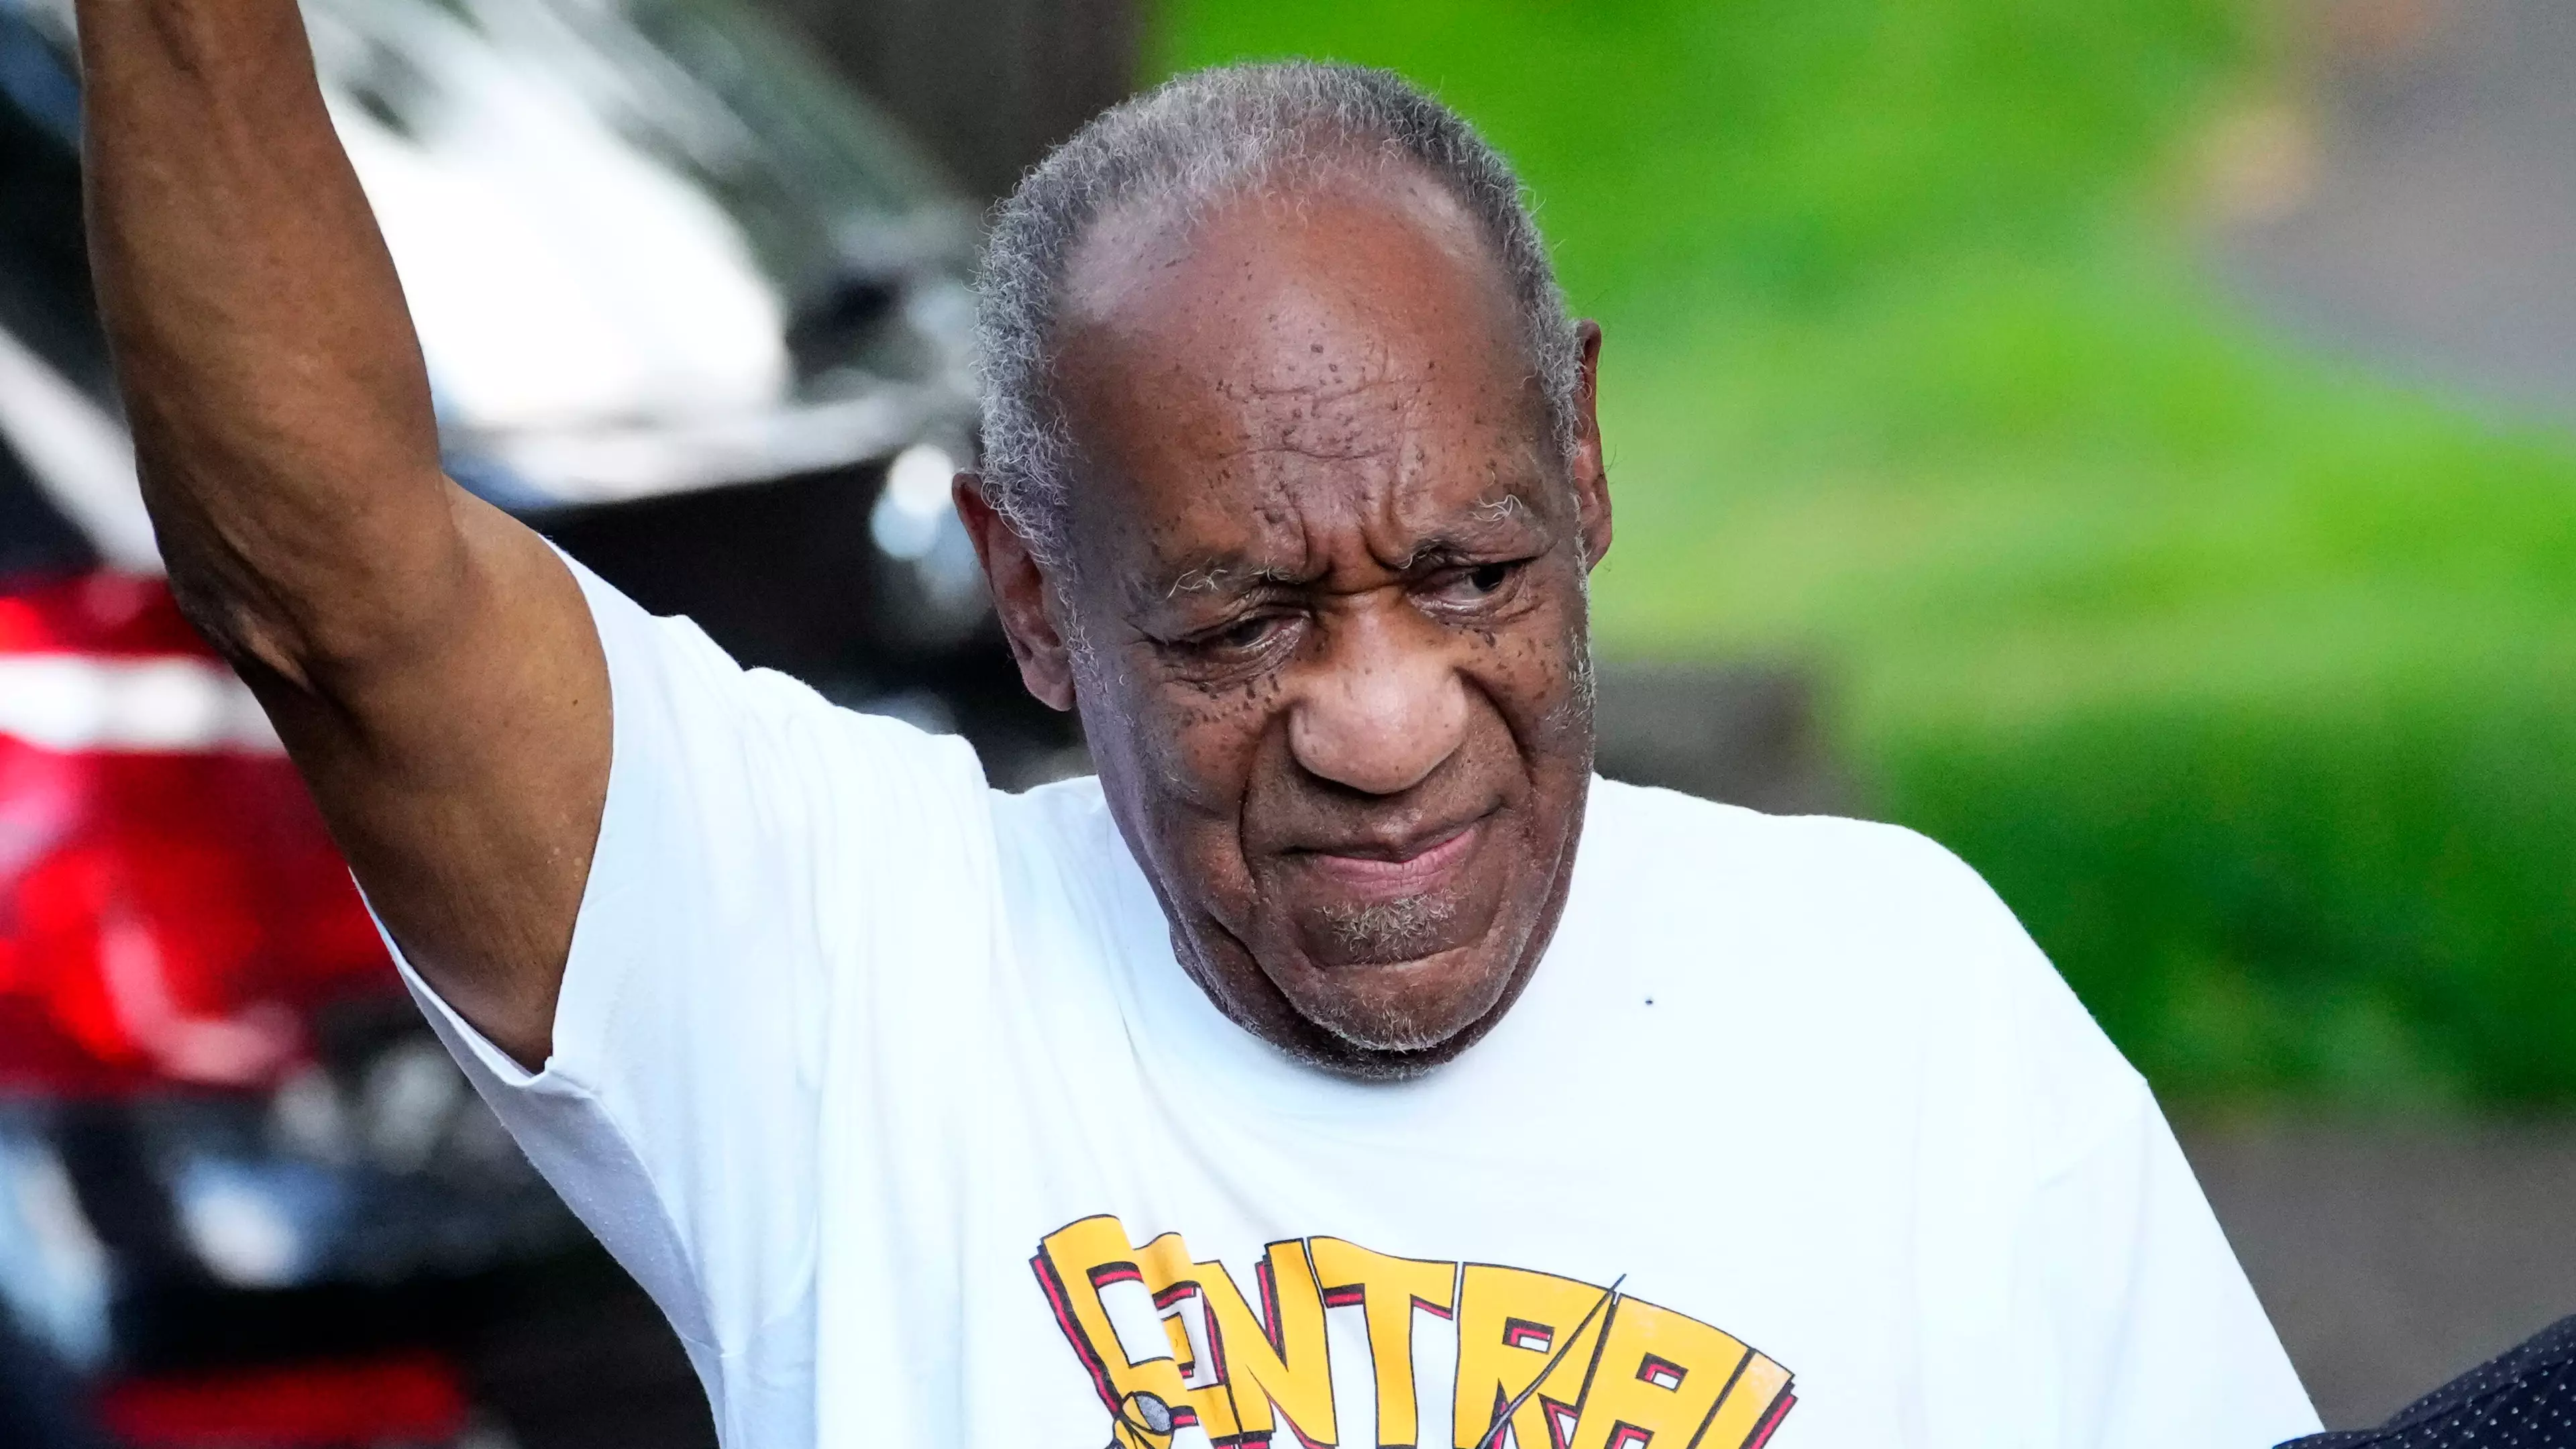 Bill Cosby Is Doing A 5-Part Documentary Series And Will Return To Stand Up Comedy